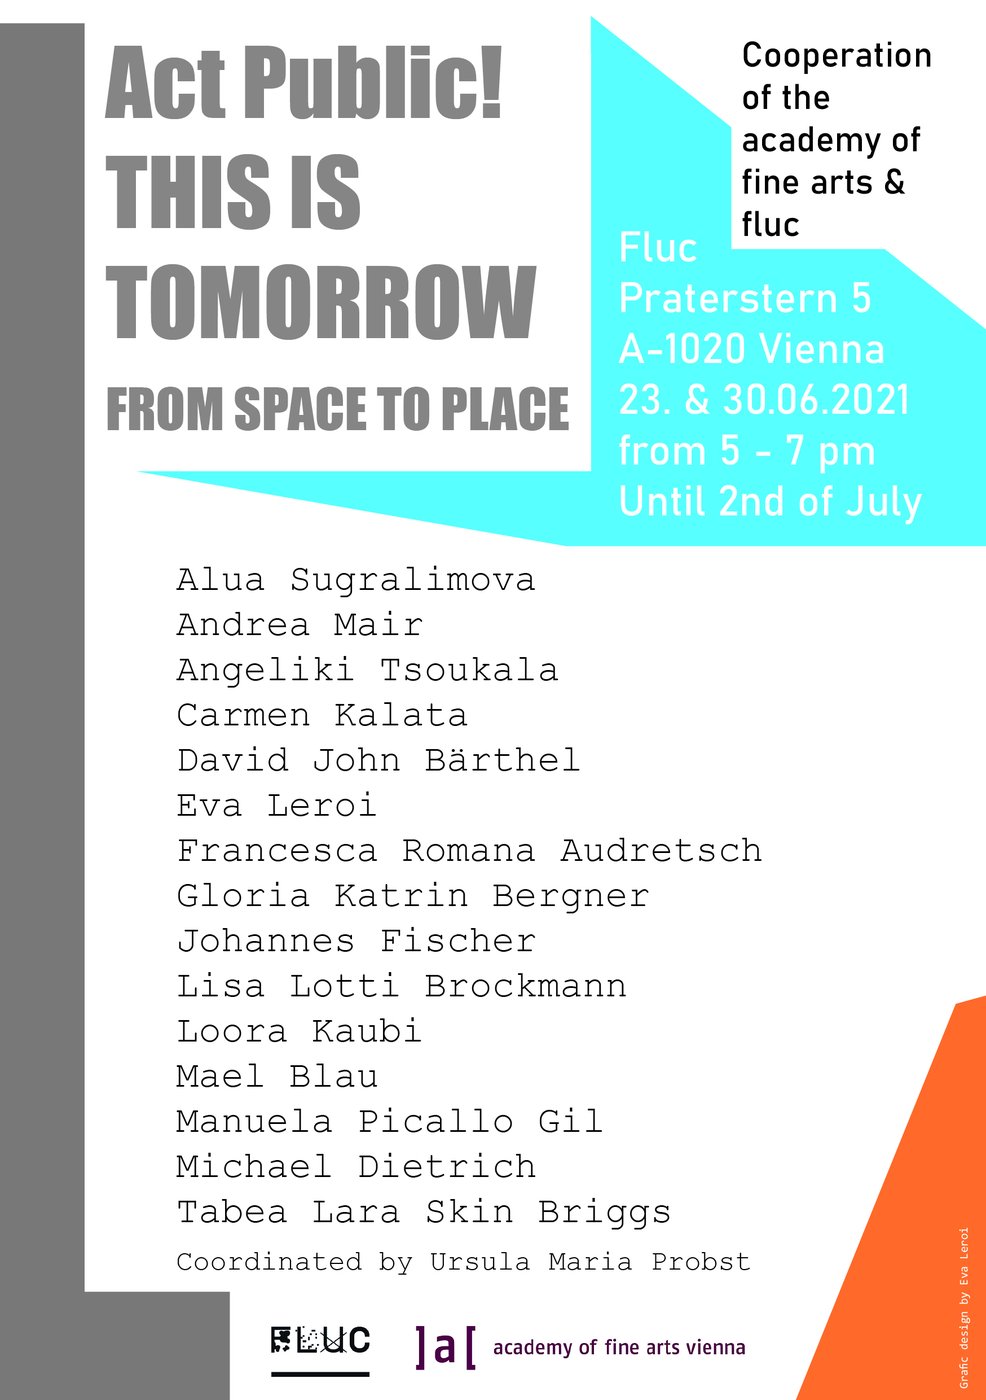 Coordinated by Ursula Maria Probst (Projektorientierte Studien). A cooperation with fluc
 
  www.fluc.at
 
 
 Daily from 5–7 pm